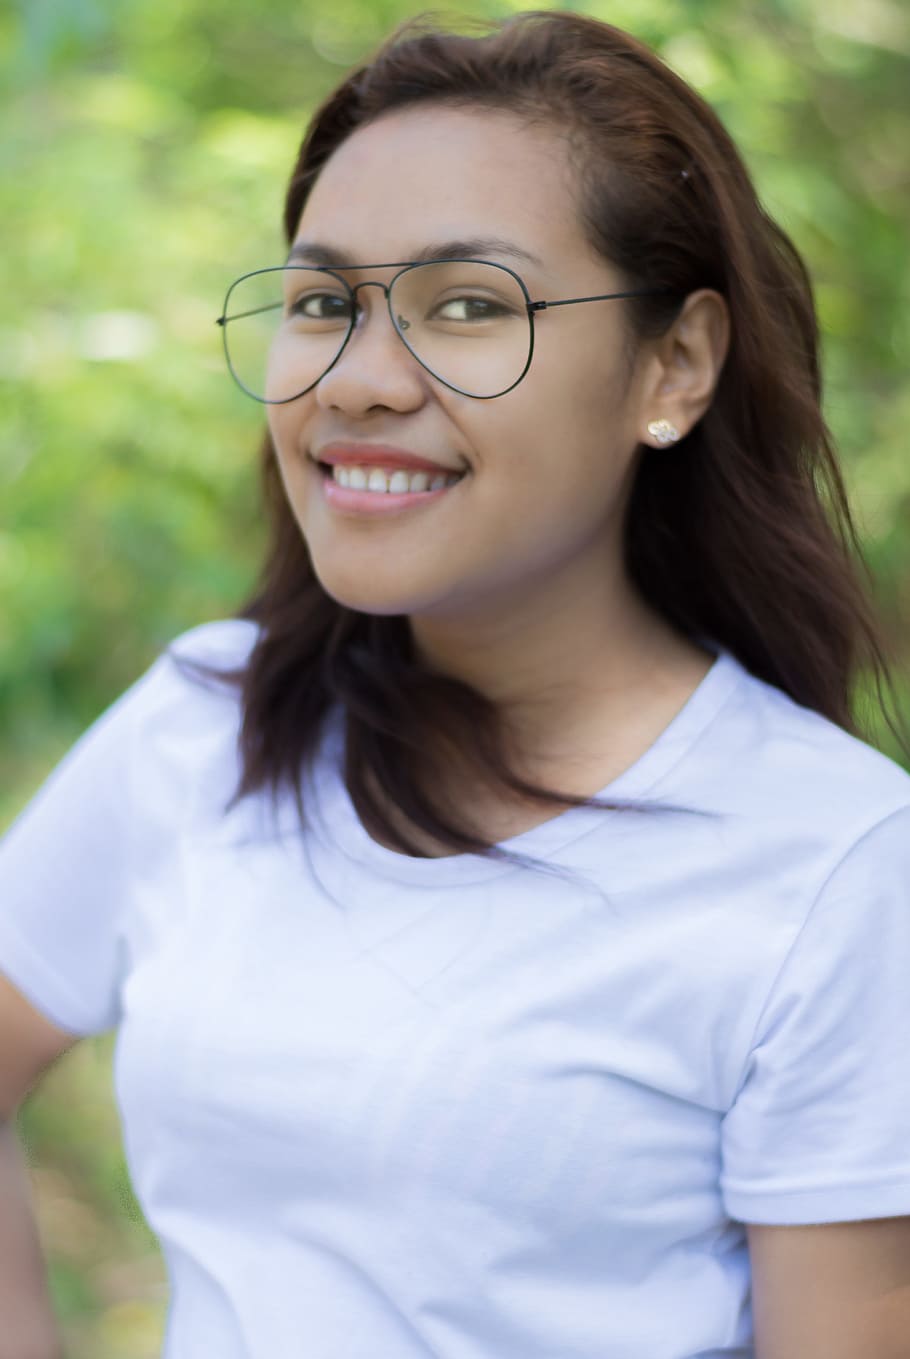 Women, Model, Girl, potrait, eyeglasses, one woman only, smiling, only women, portrait, one person